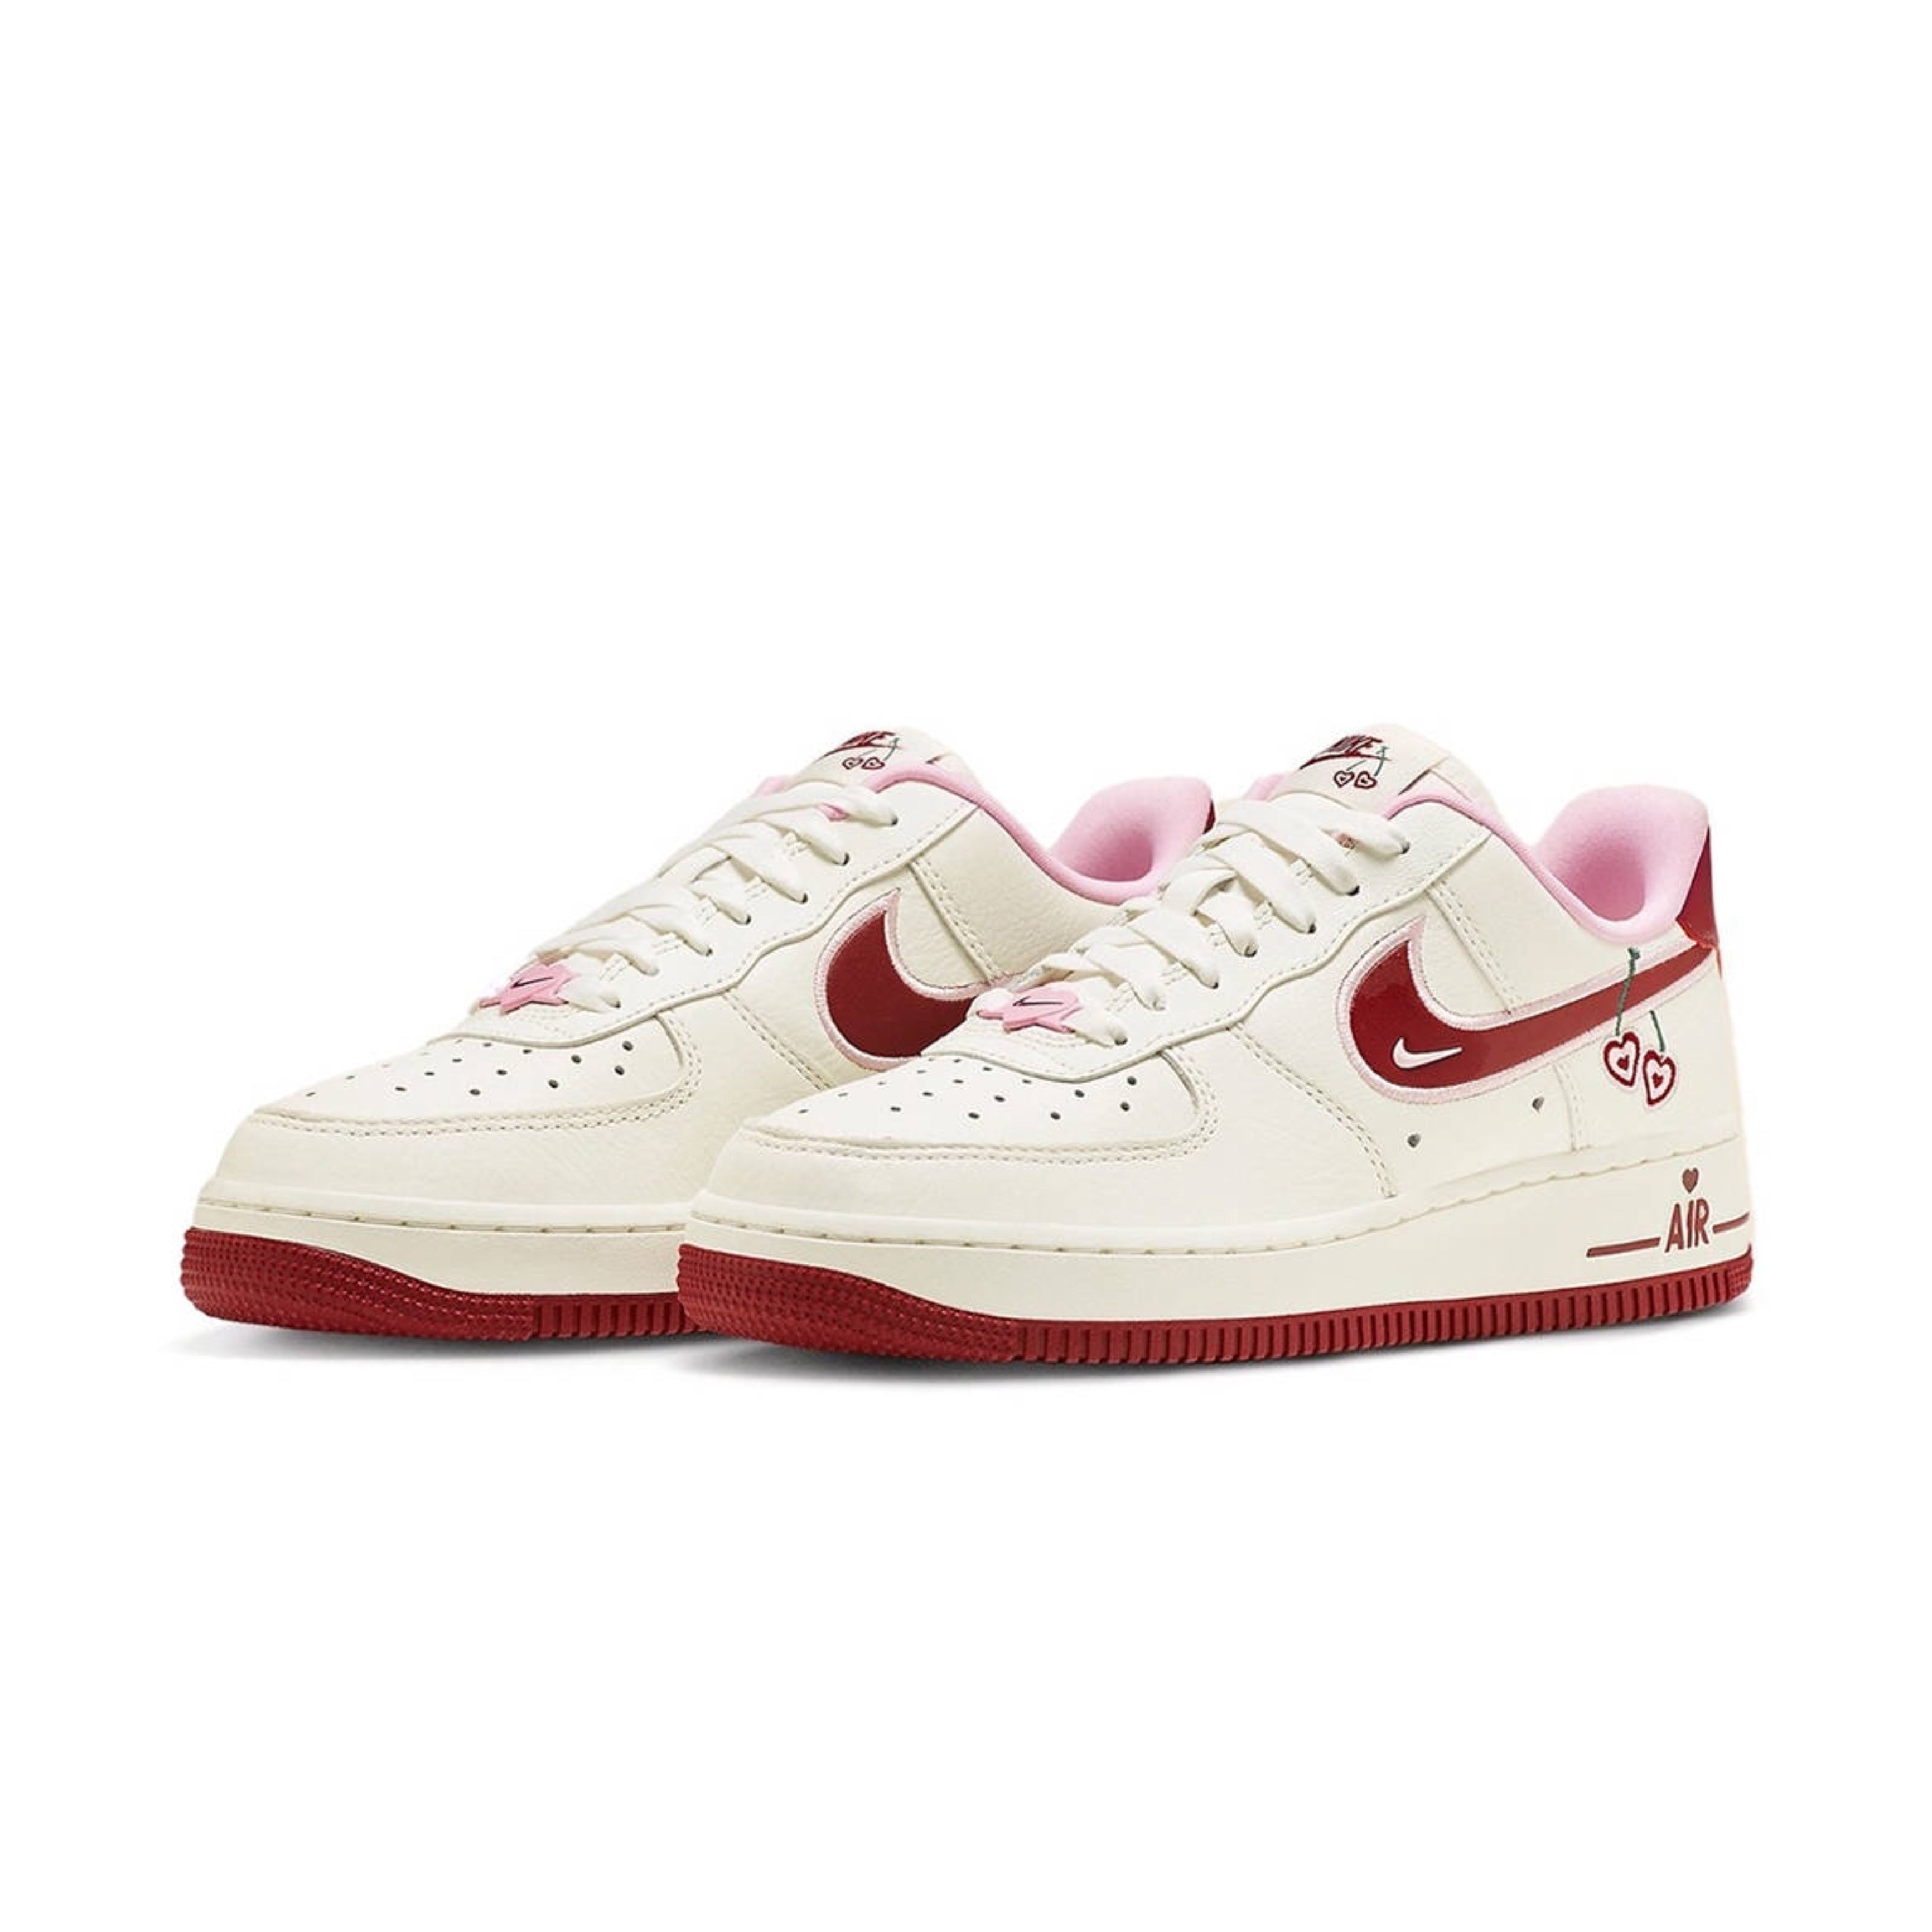 Nike airforce A1 love cherry shoes